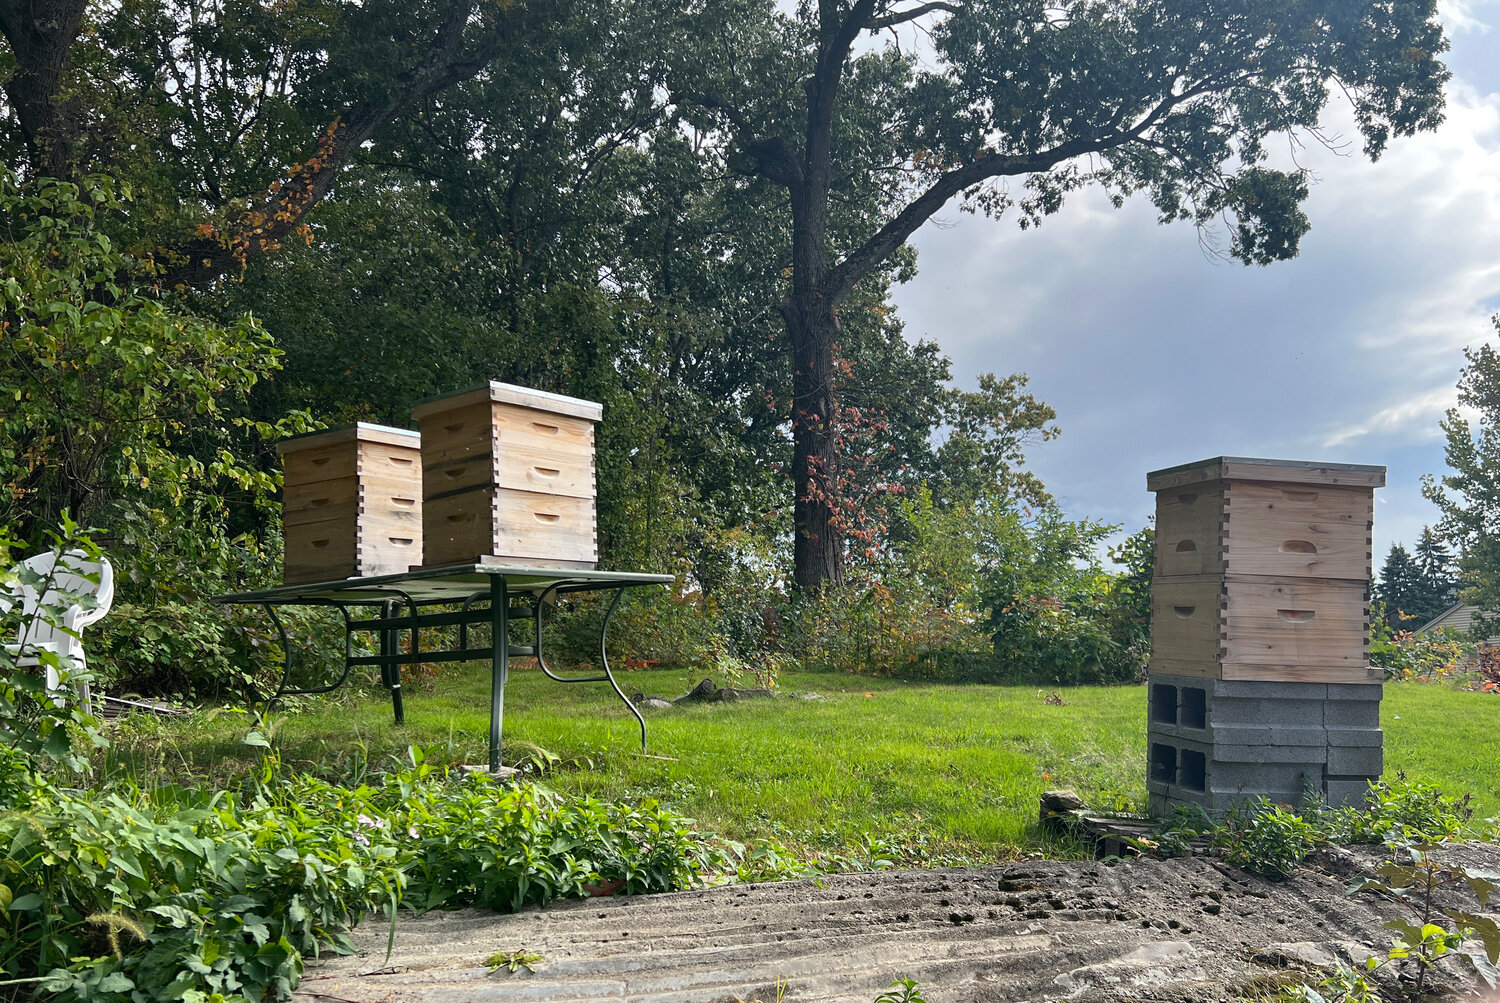 The duo tends beehives in Coventry and Providence